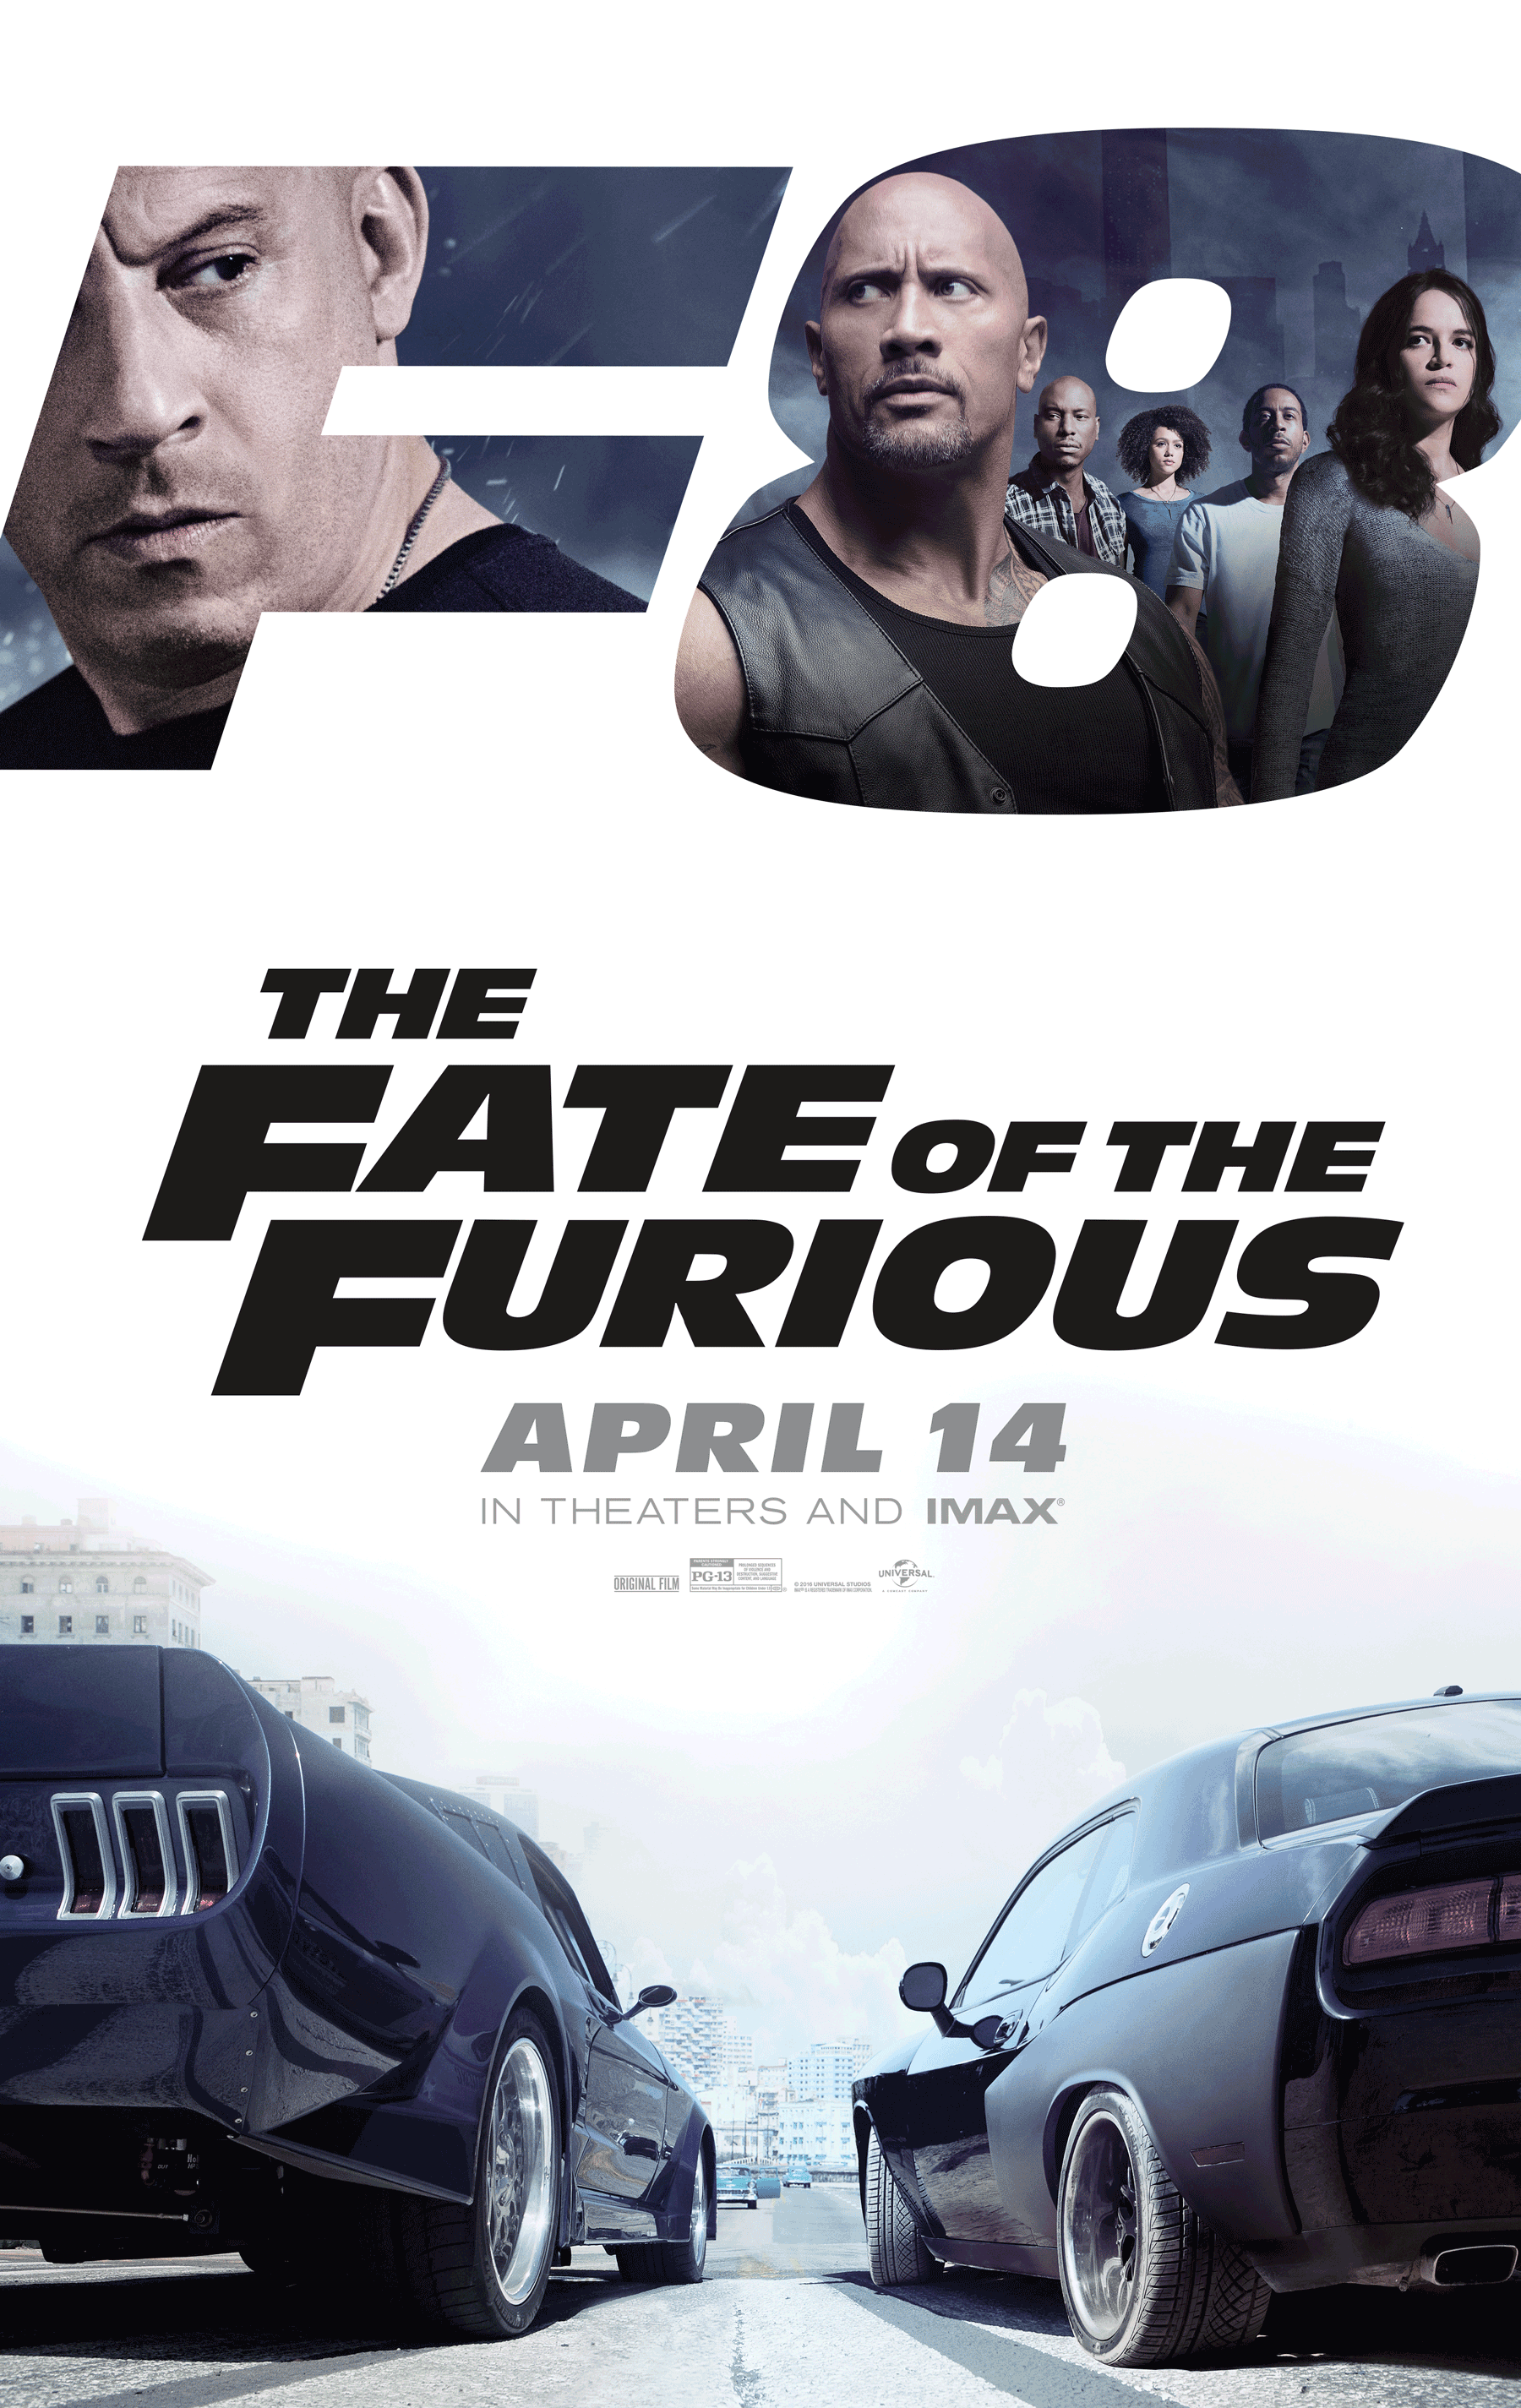 The Fate of the Furious Poster. In Theaters Now